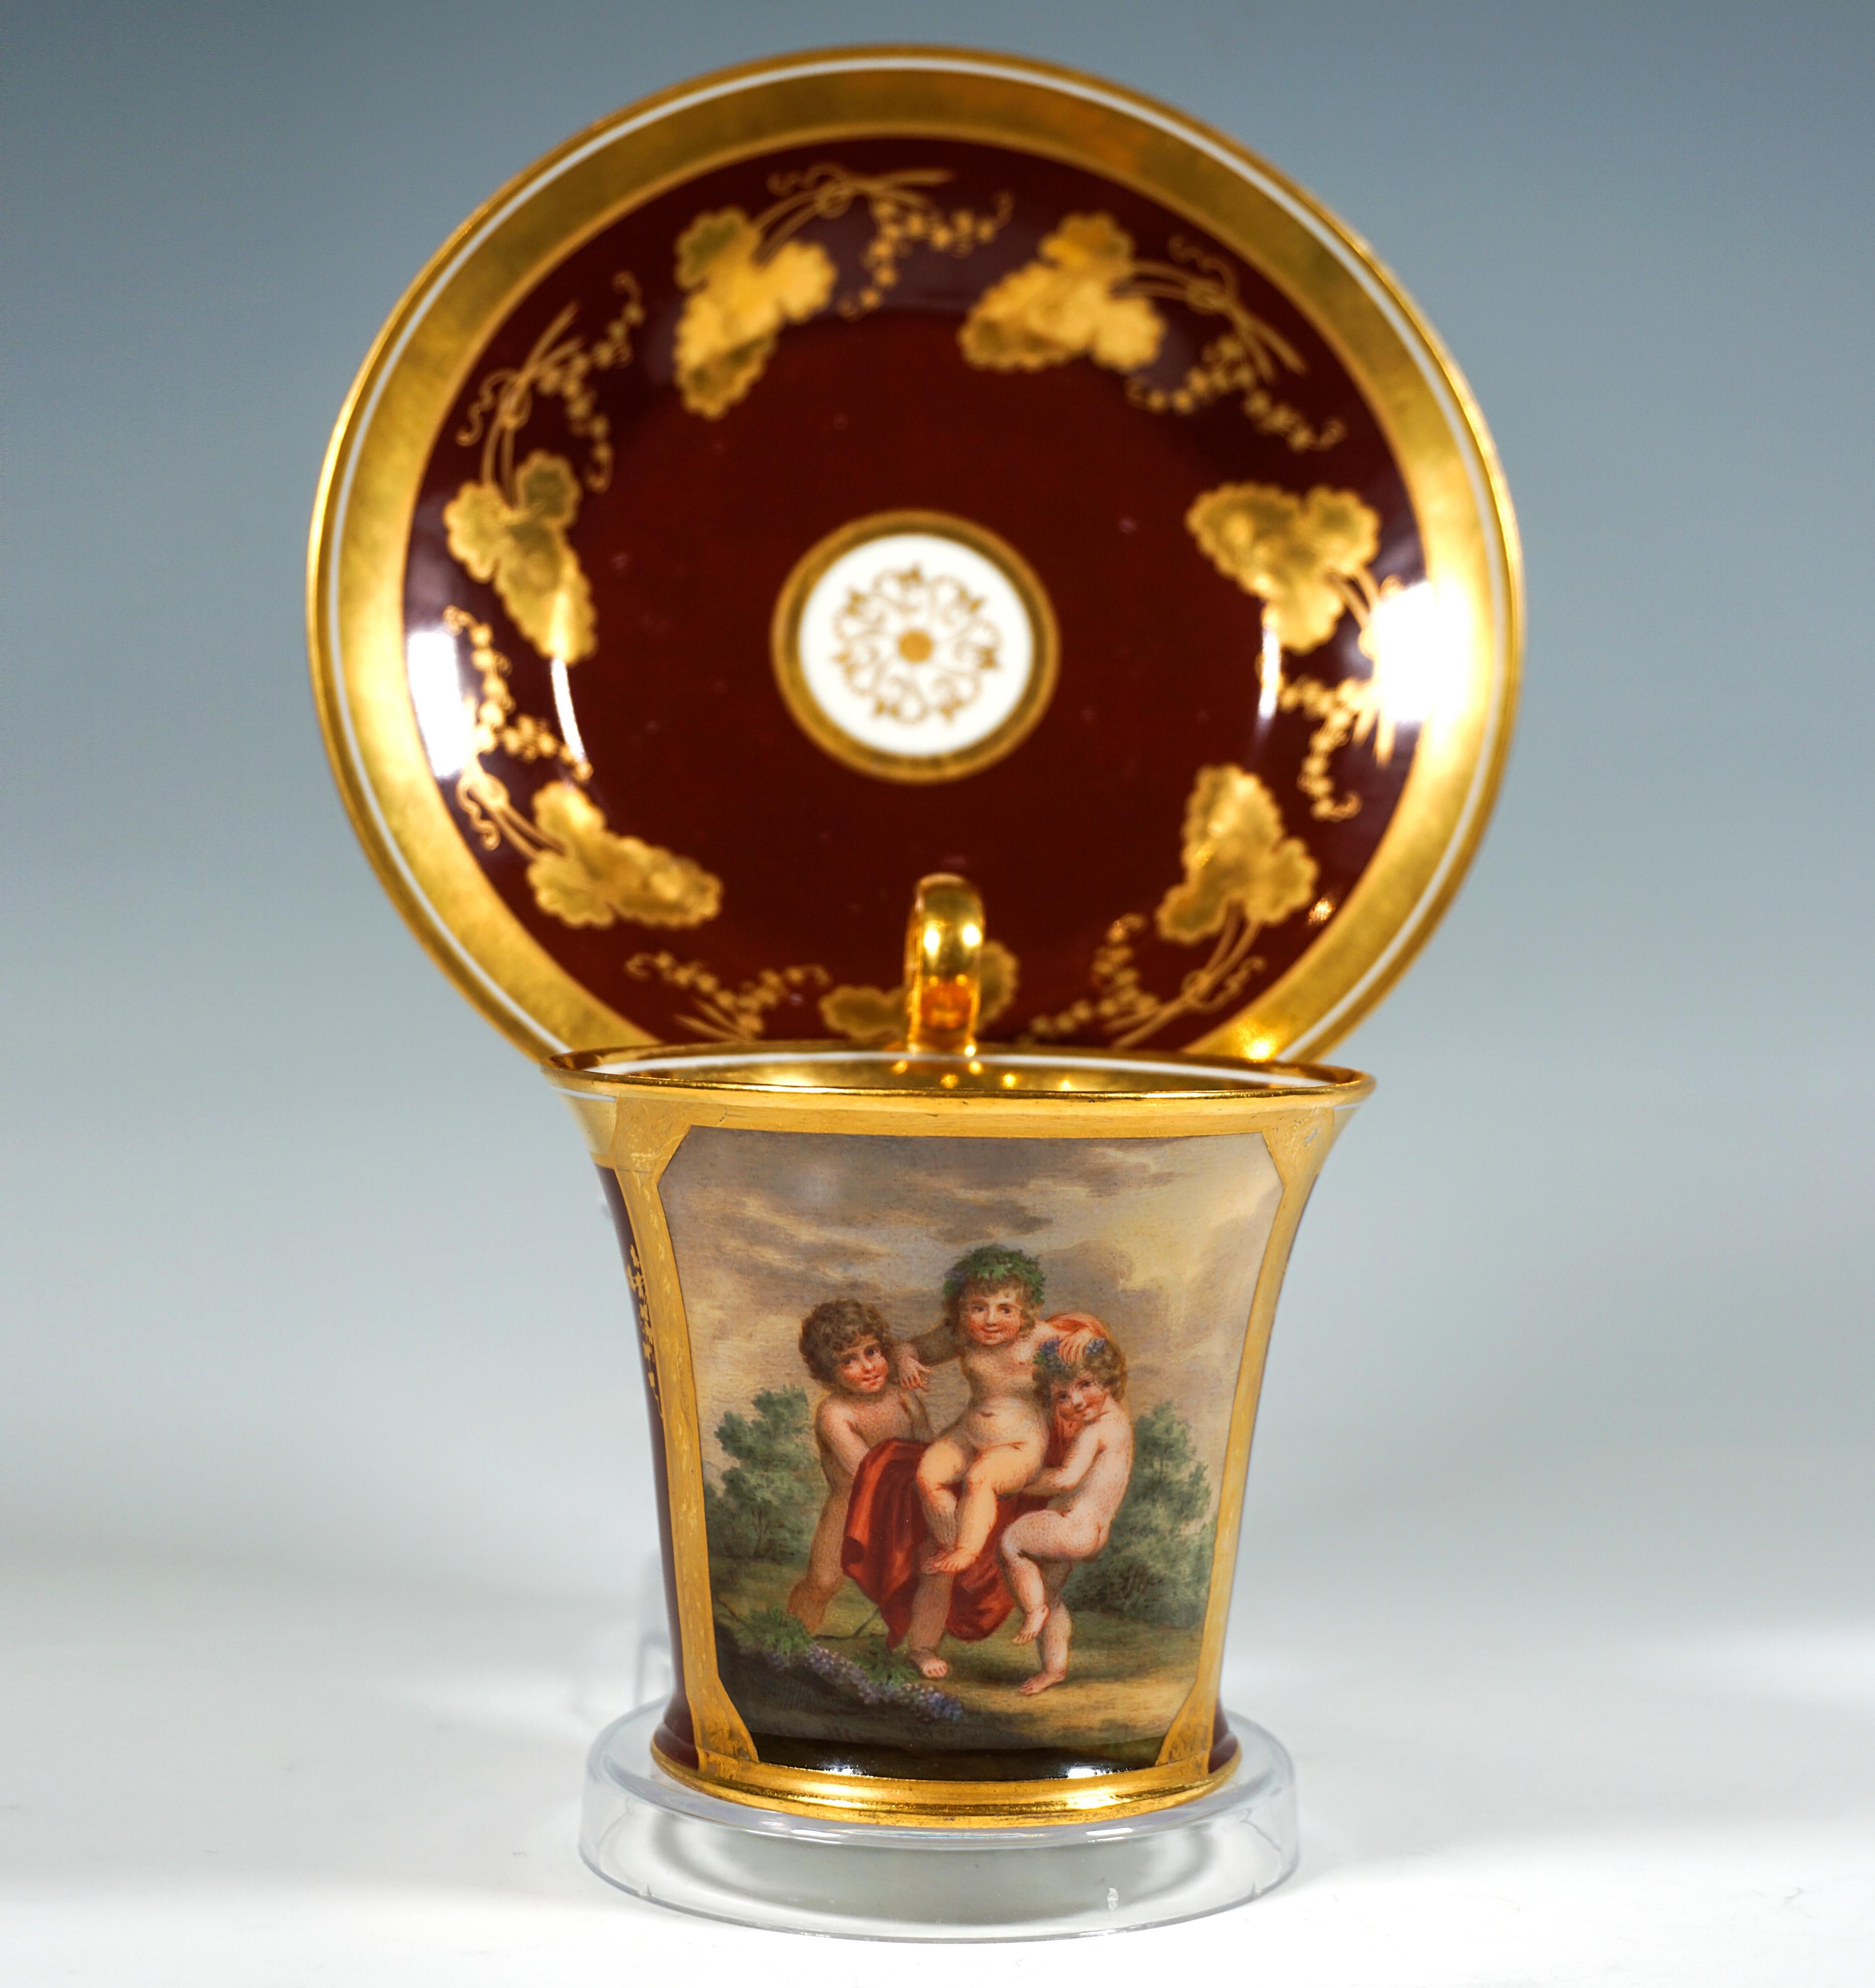 Extraordinarily decorated porcelain cup with saucer:
The front of the cup, which widens conically towards the top, is decorated with a polychrome motif over its entire height: two putti in front of a park landscape with a cloudy sky lifting a third